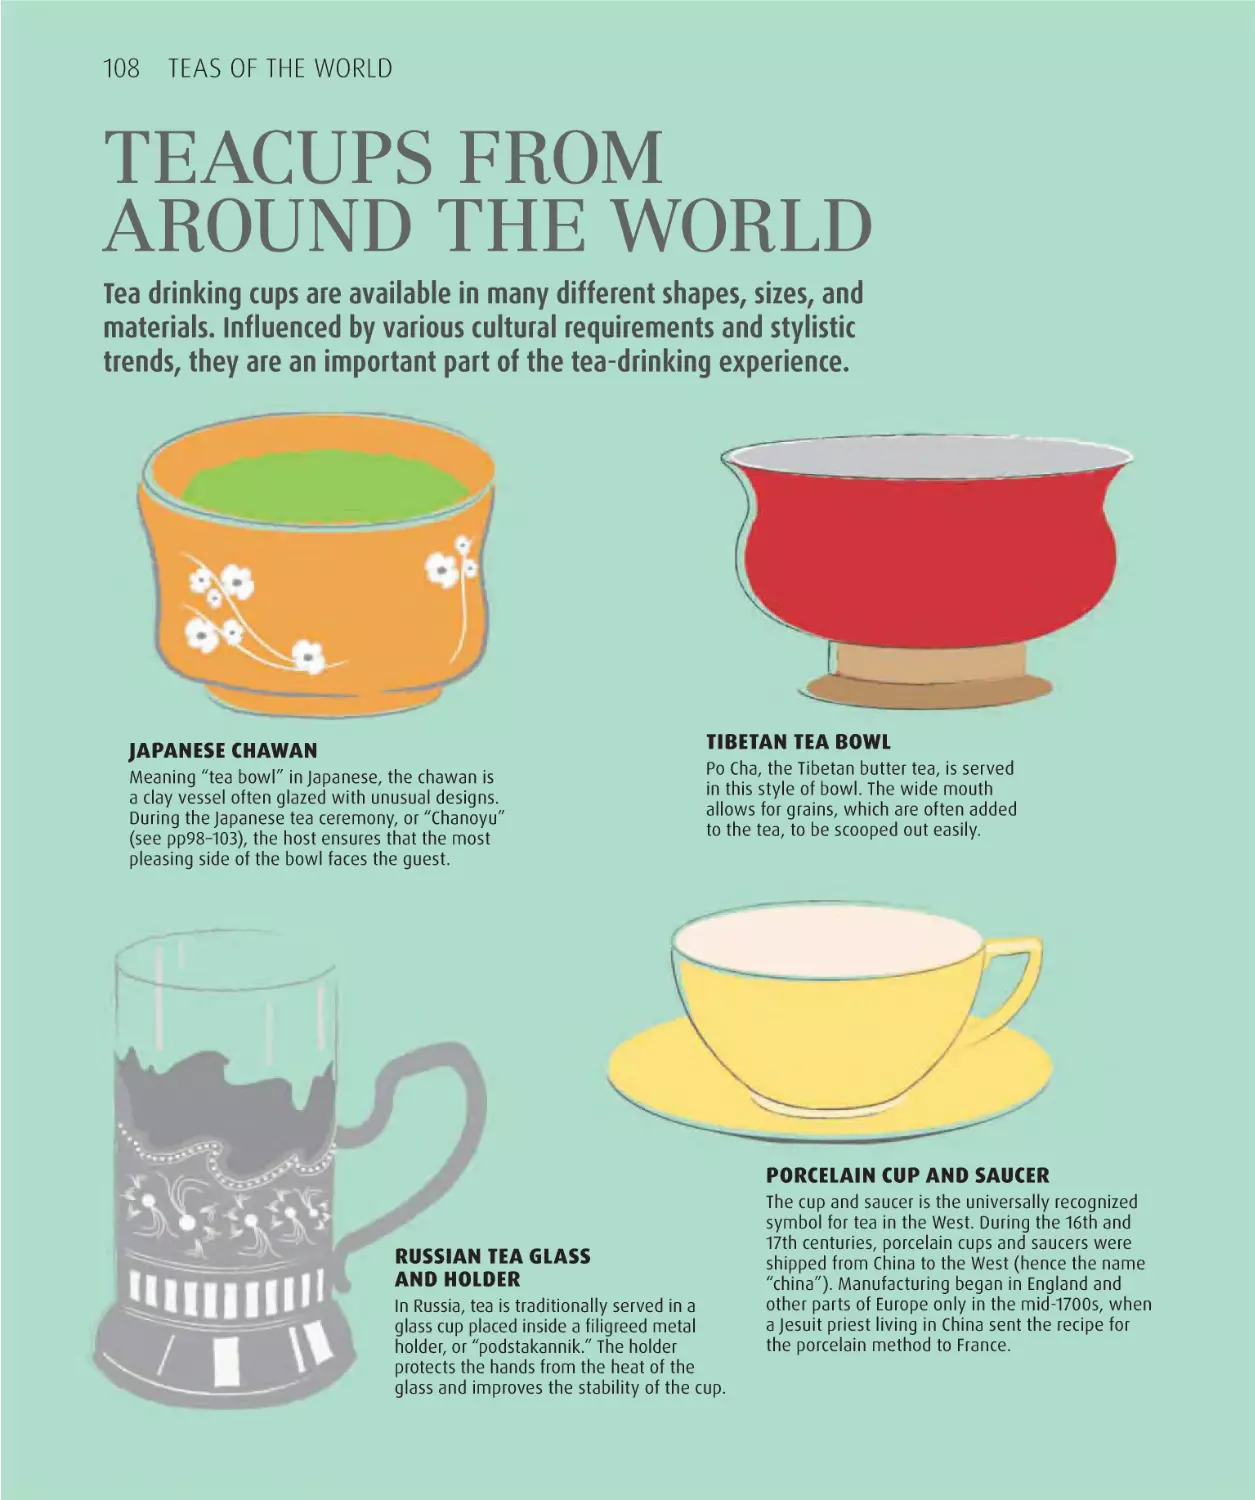 Tea cups from around the world 108